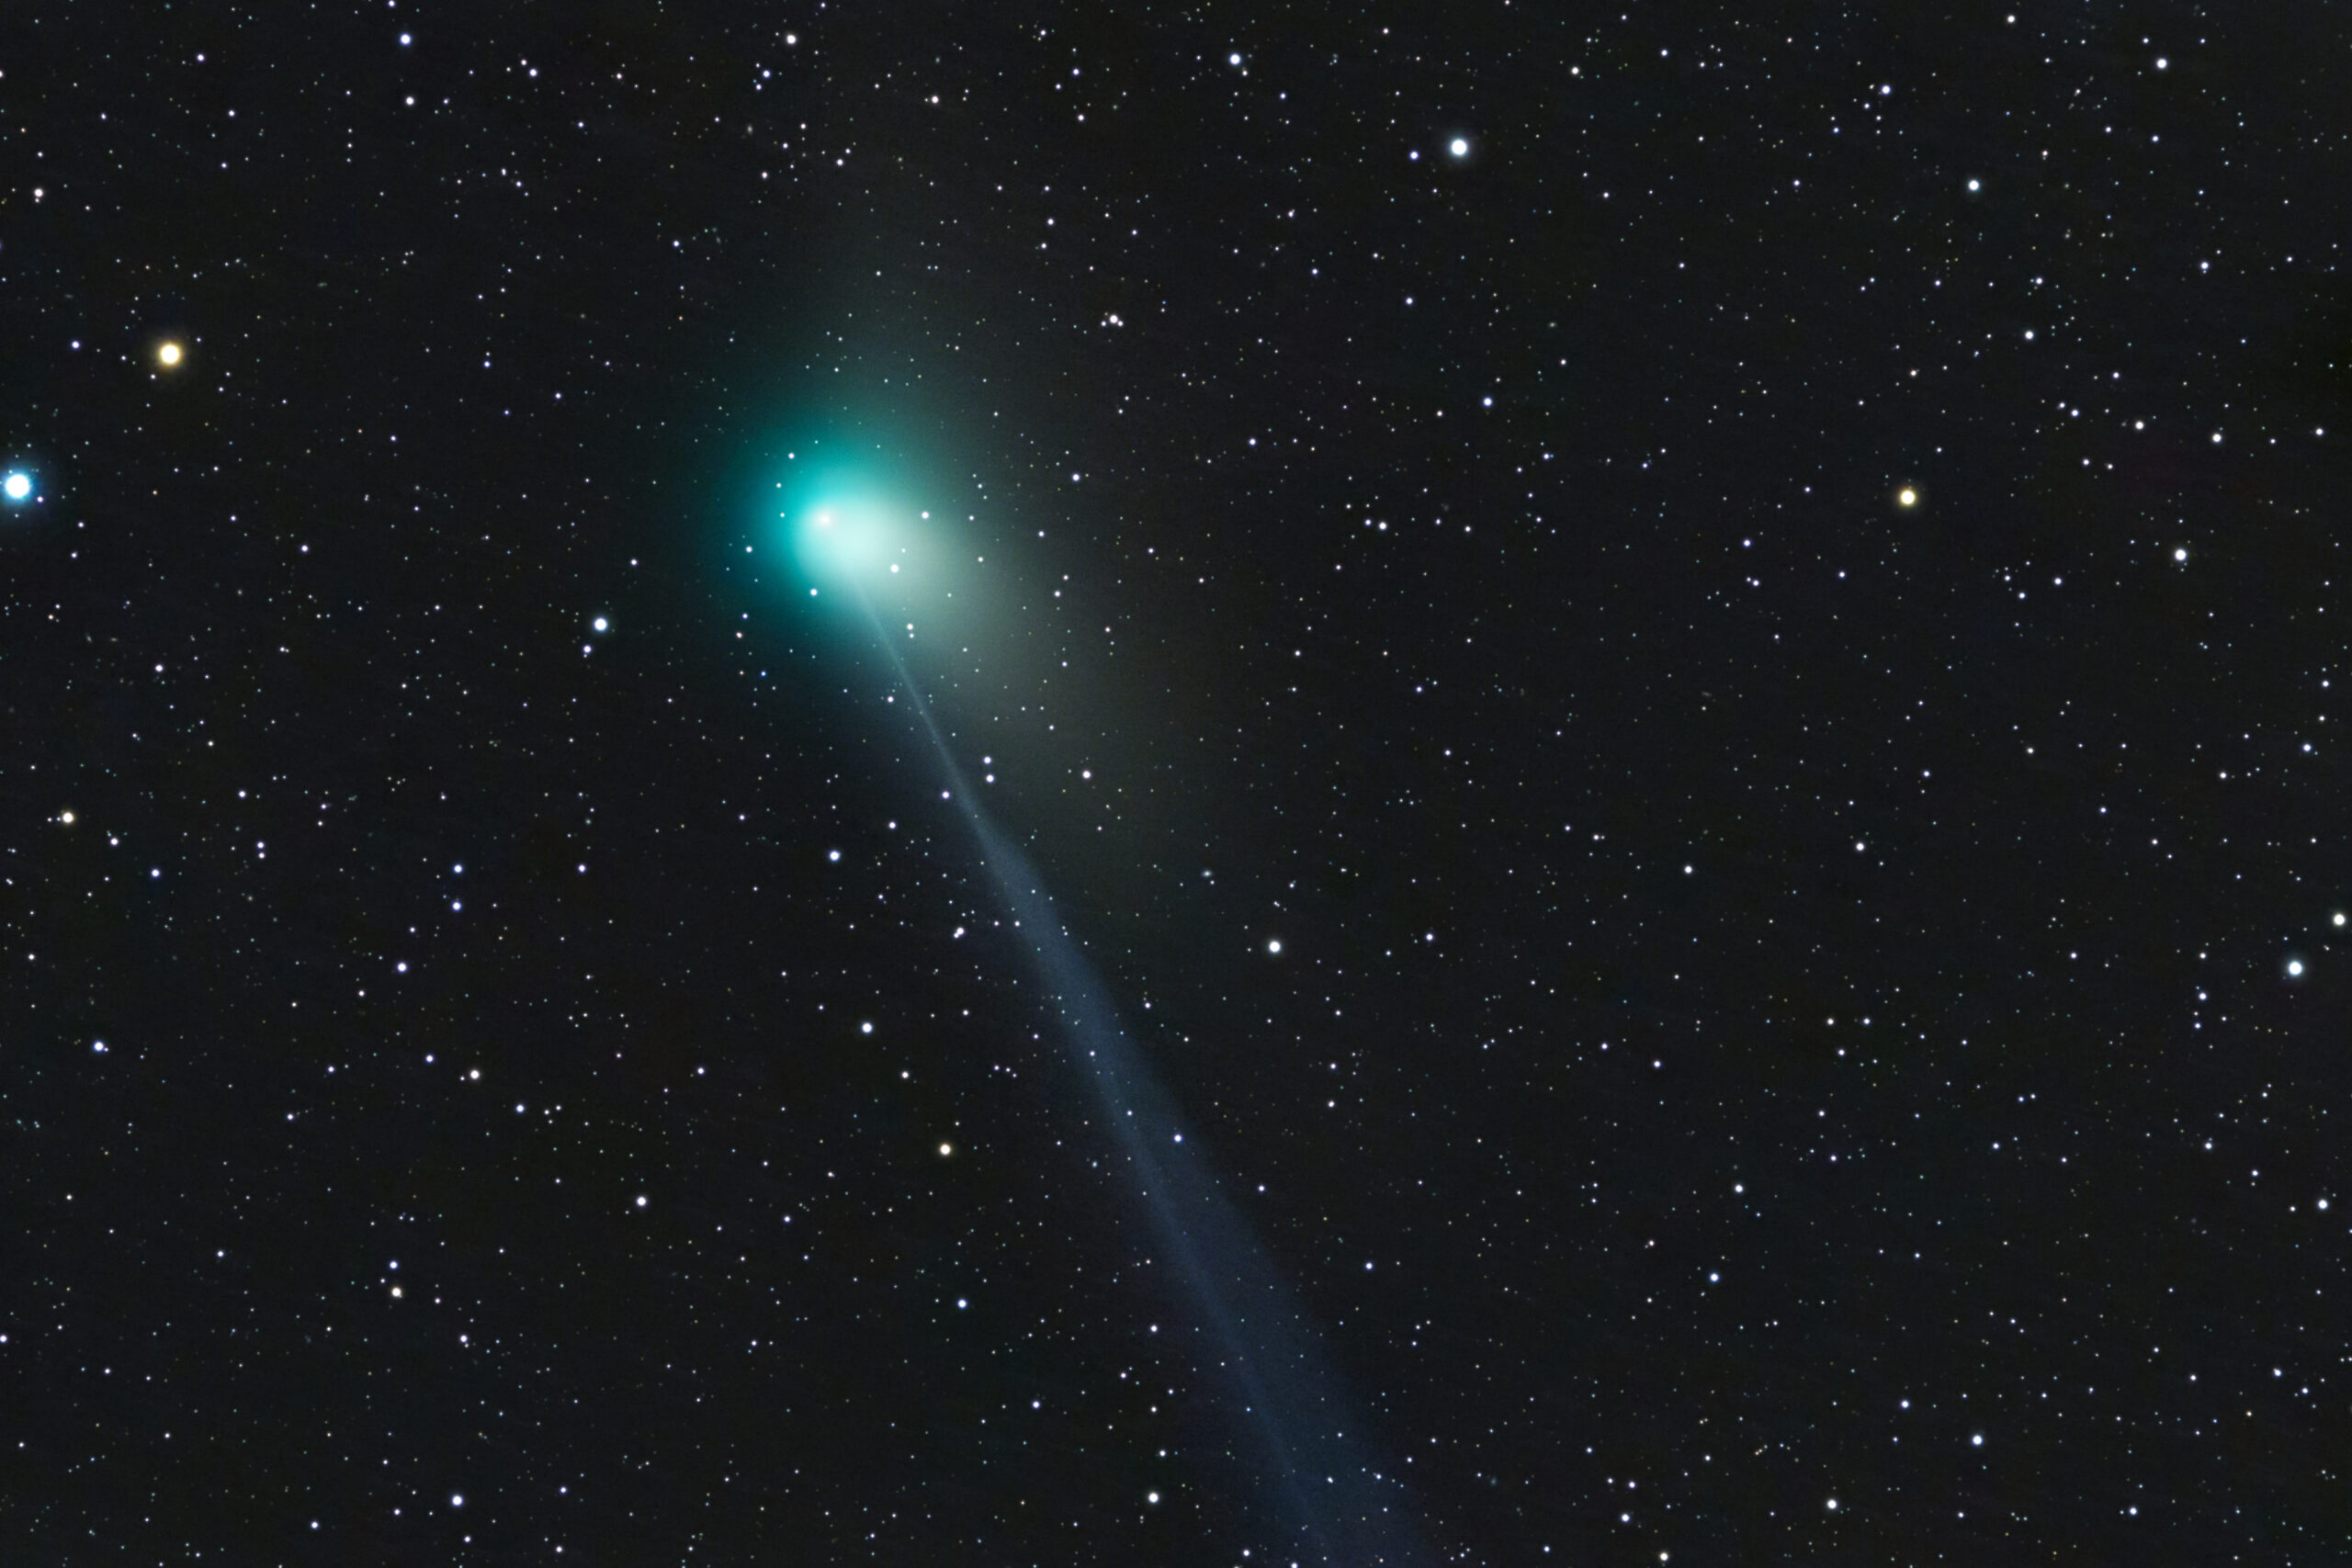 Comet_ZTF_and_its_apparent_three_tails